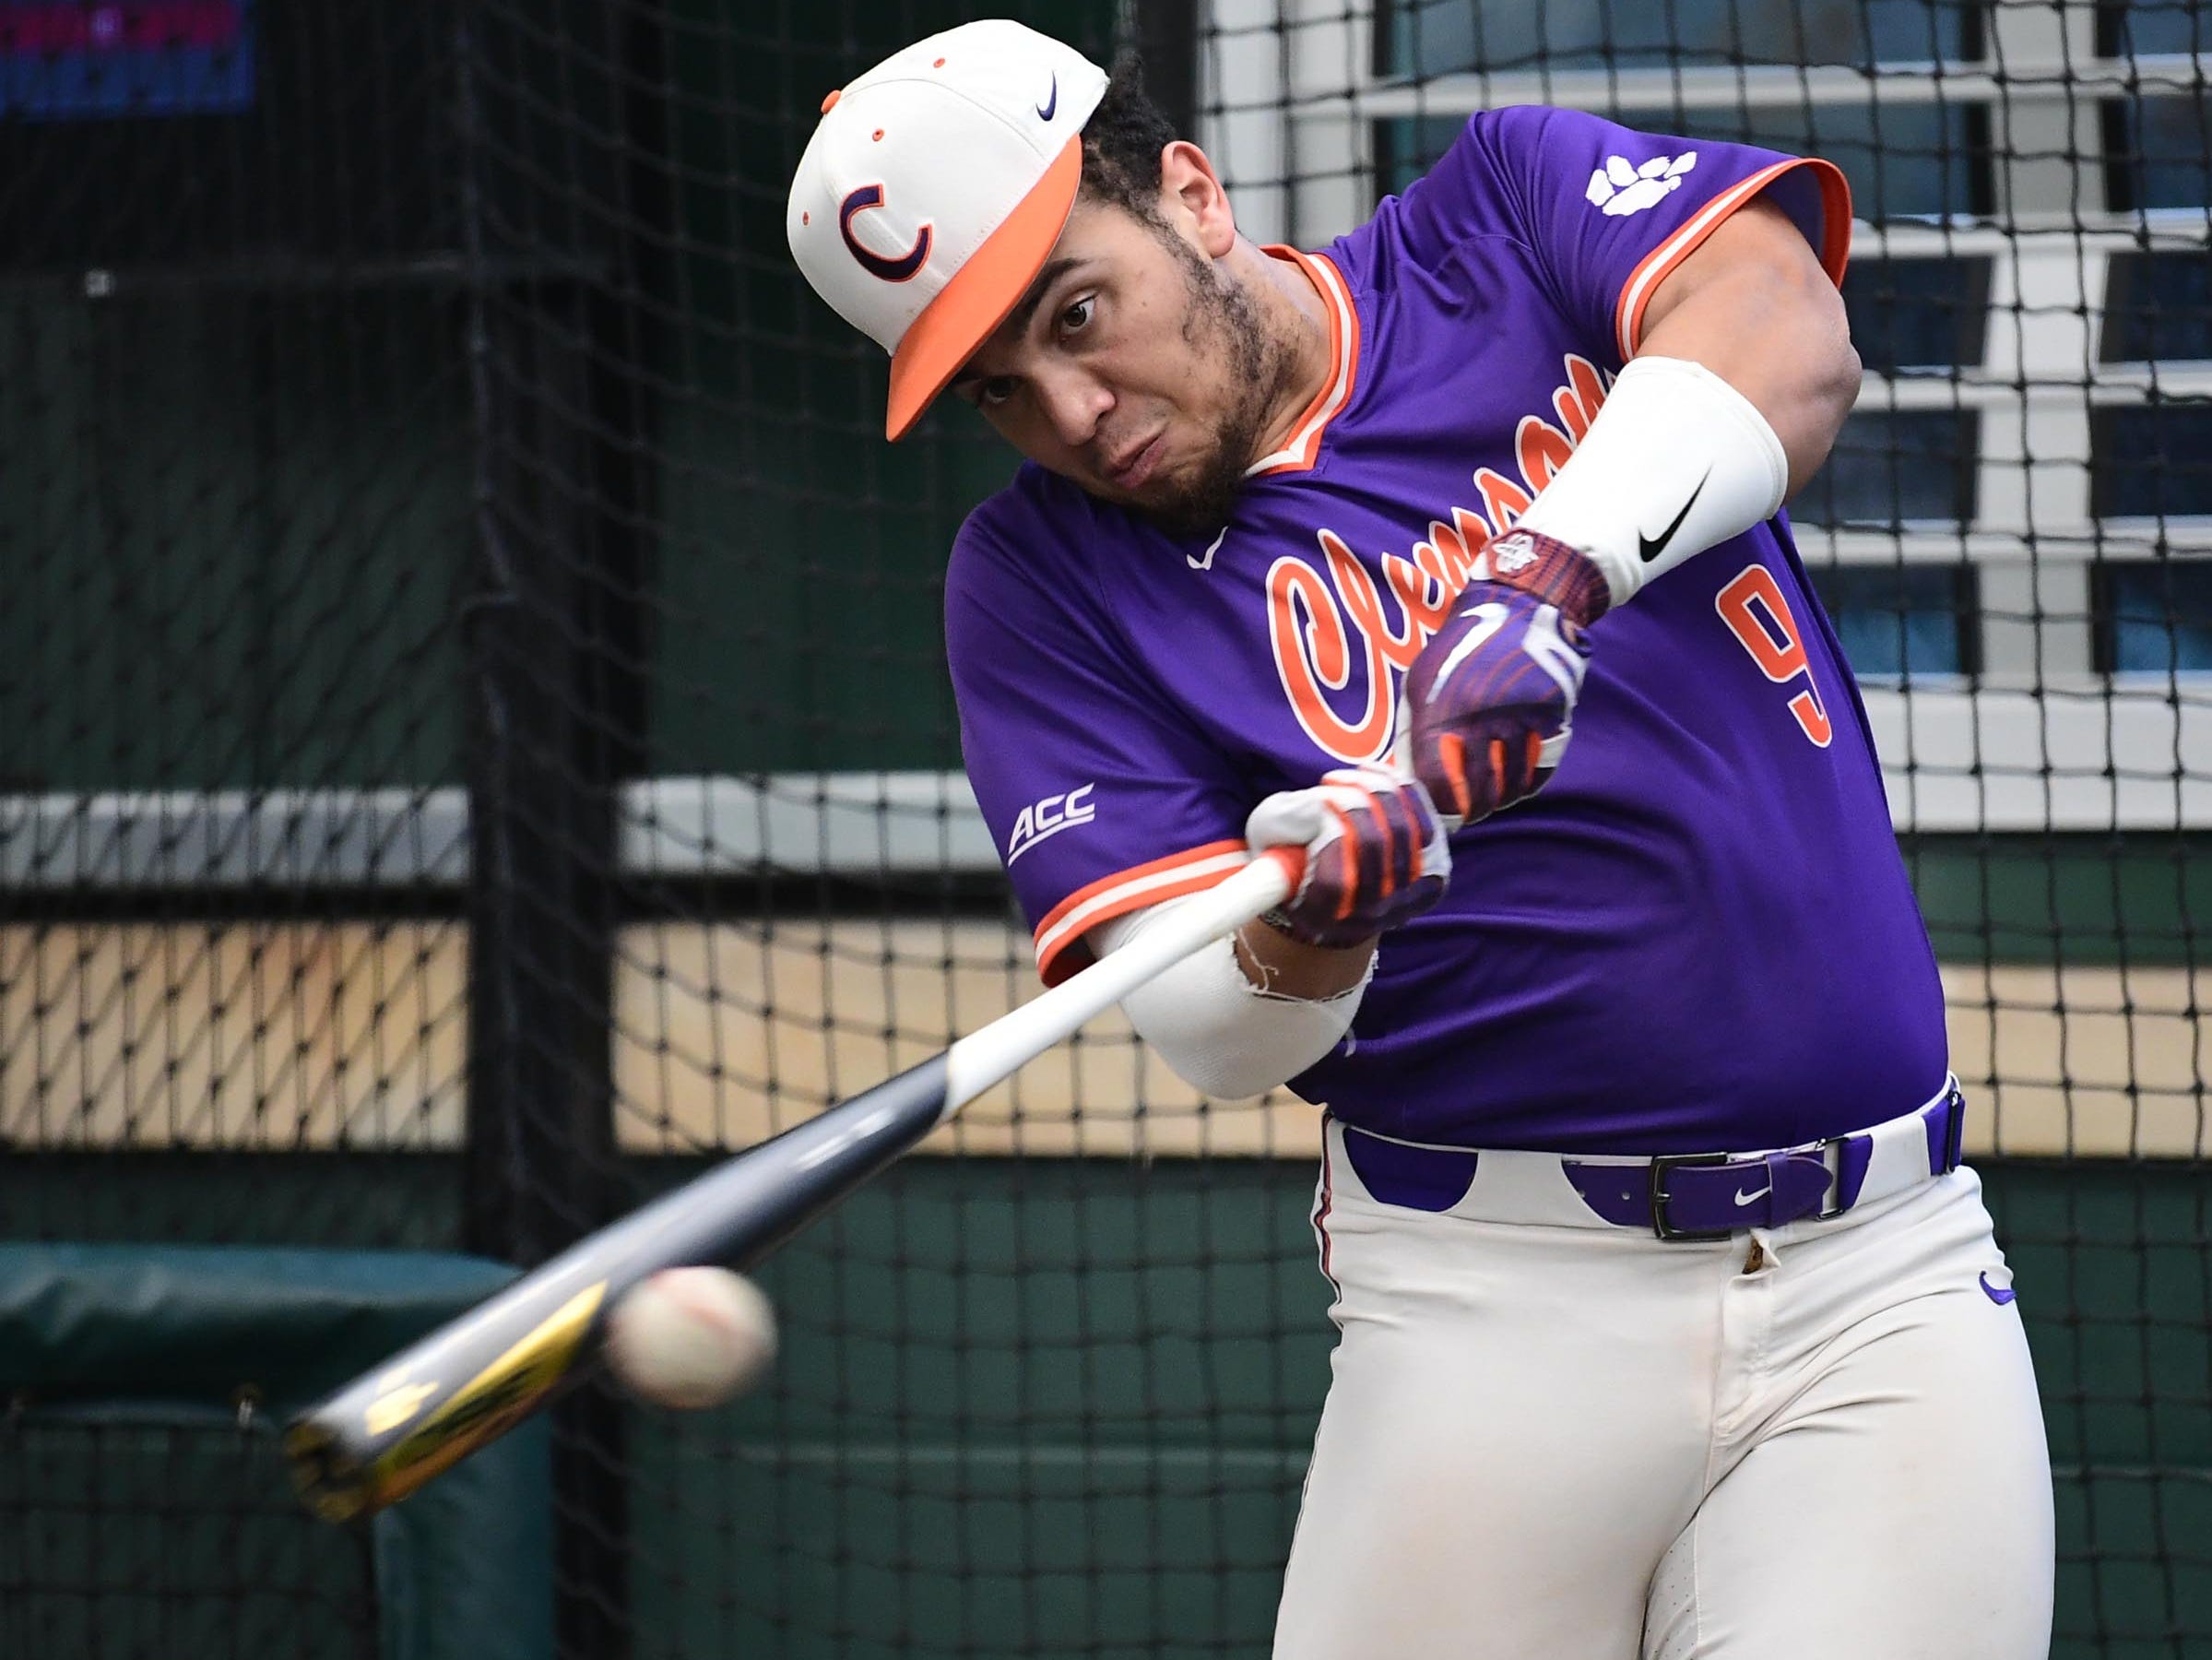 Clemson catcher Jonathan French(9) during batting practice at the first official team Spring practice at Doug Kingsmore Stadium in Clemson Friday, January 24, 2020.